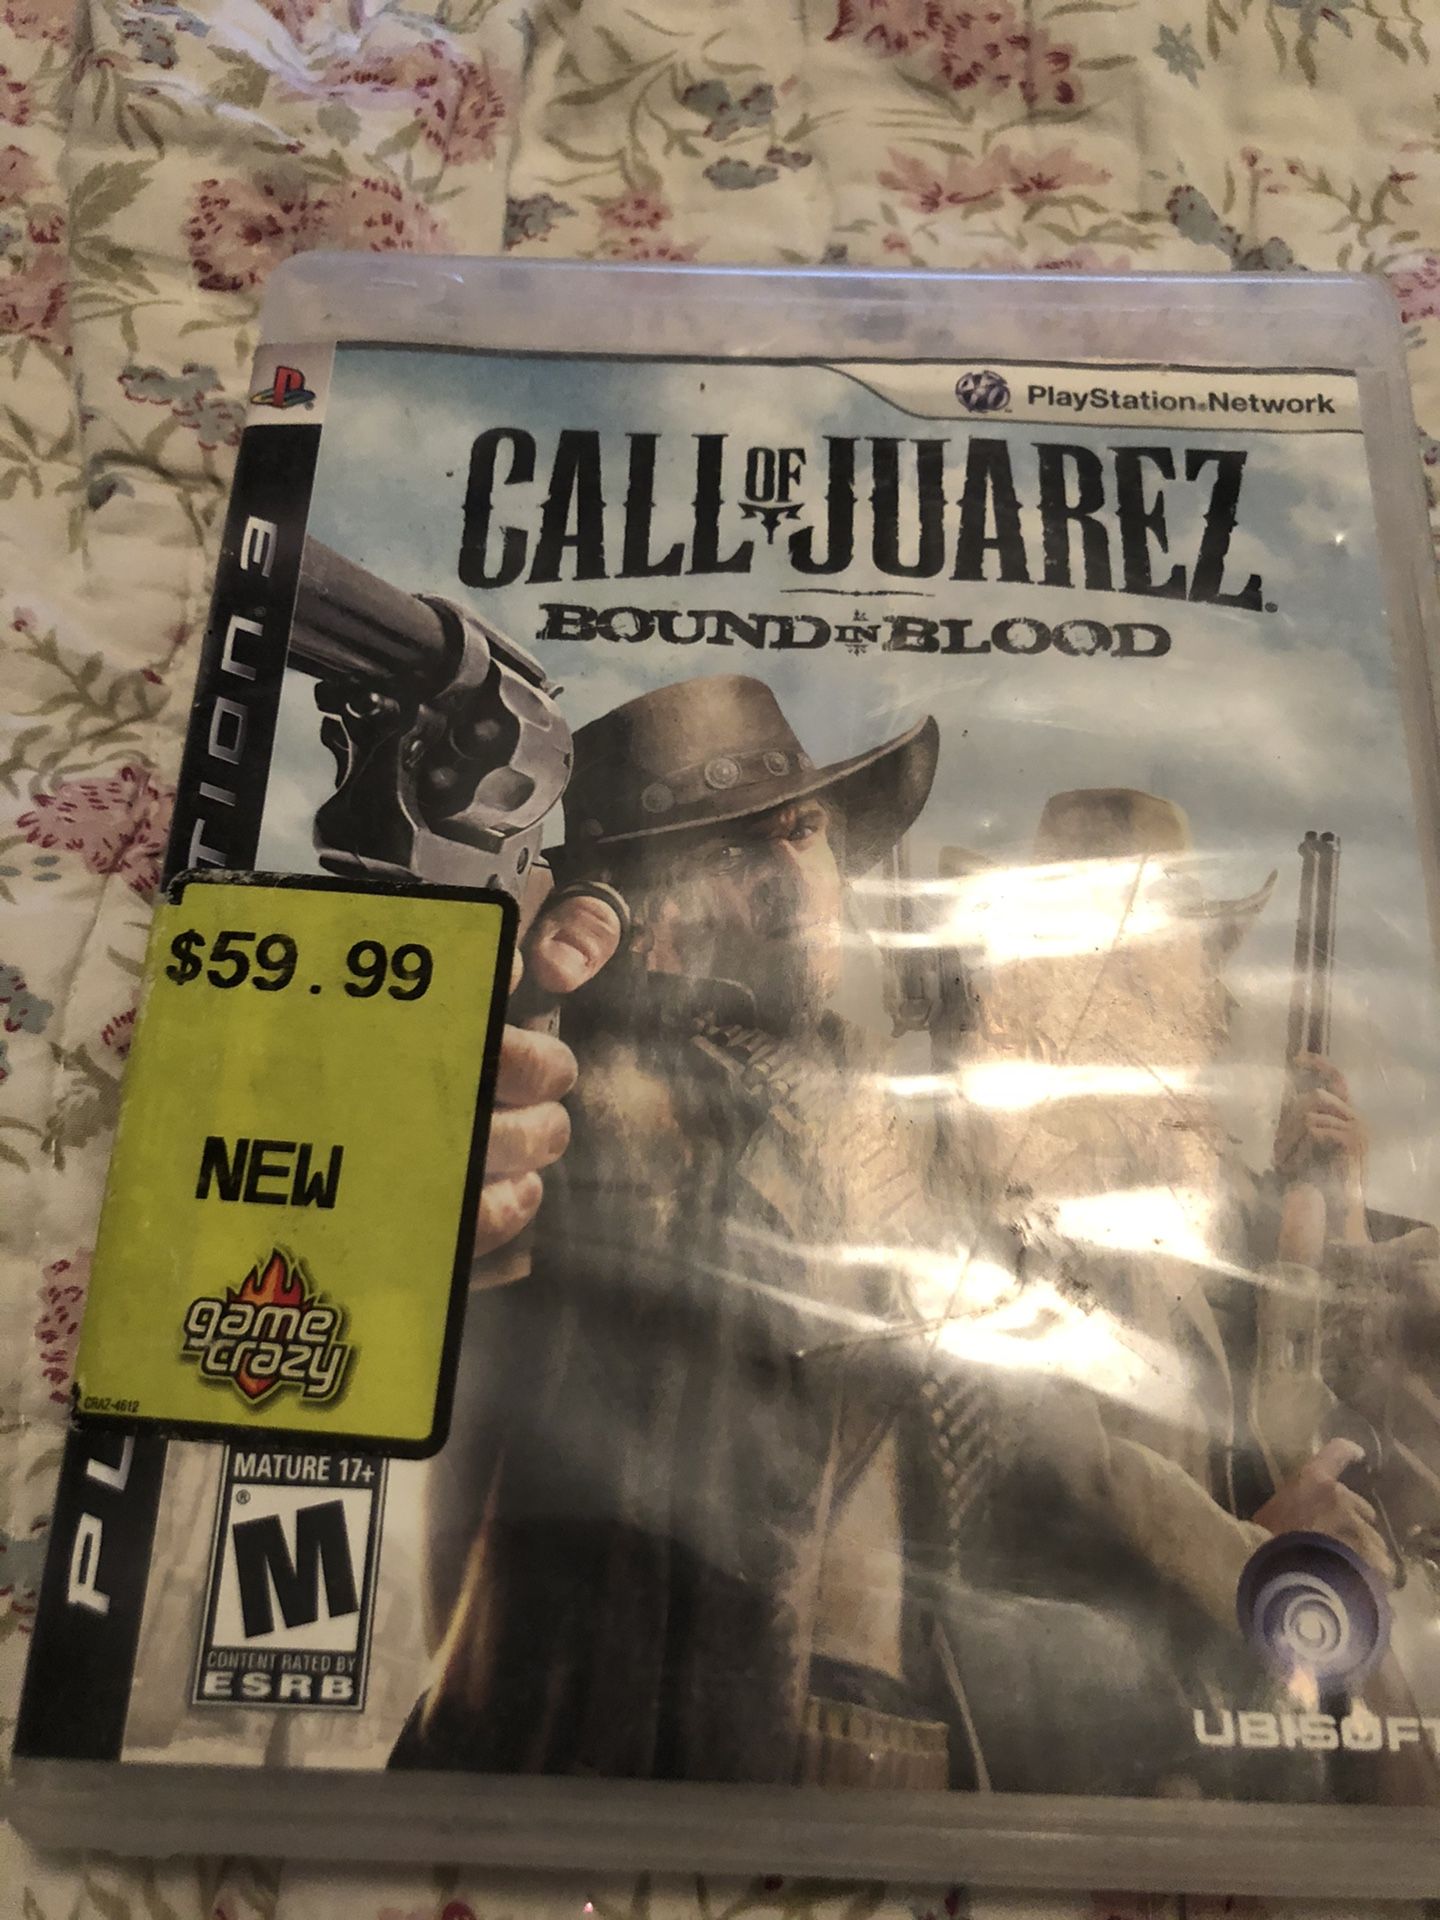 Call of Juarez bound in blood PlayStation 3 PS3 game